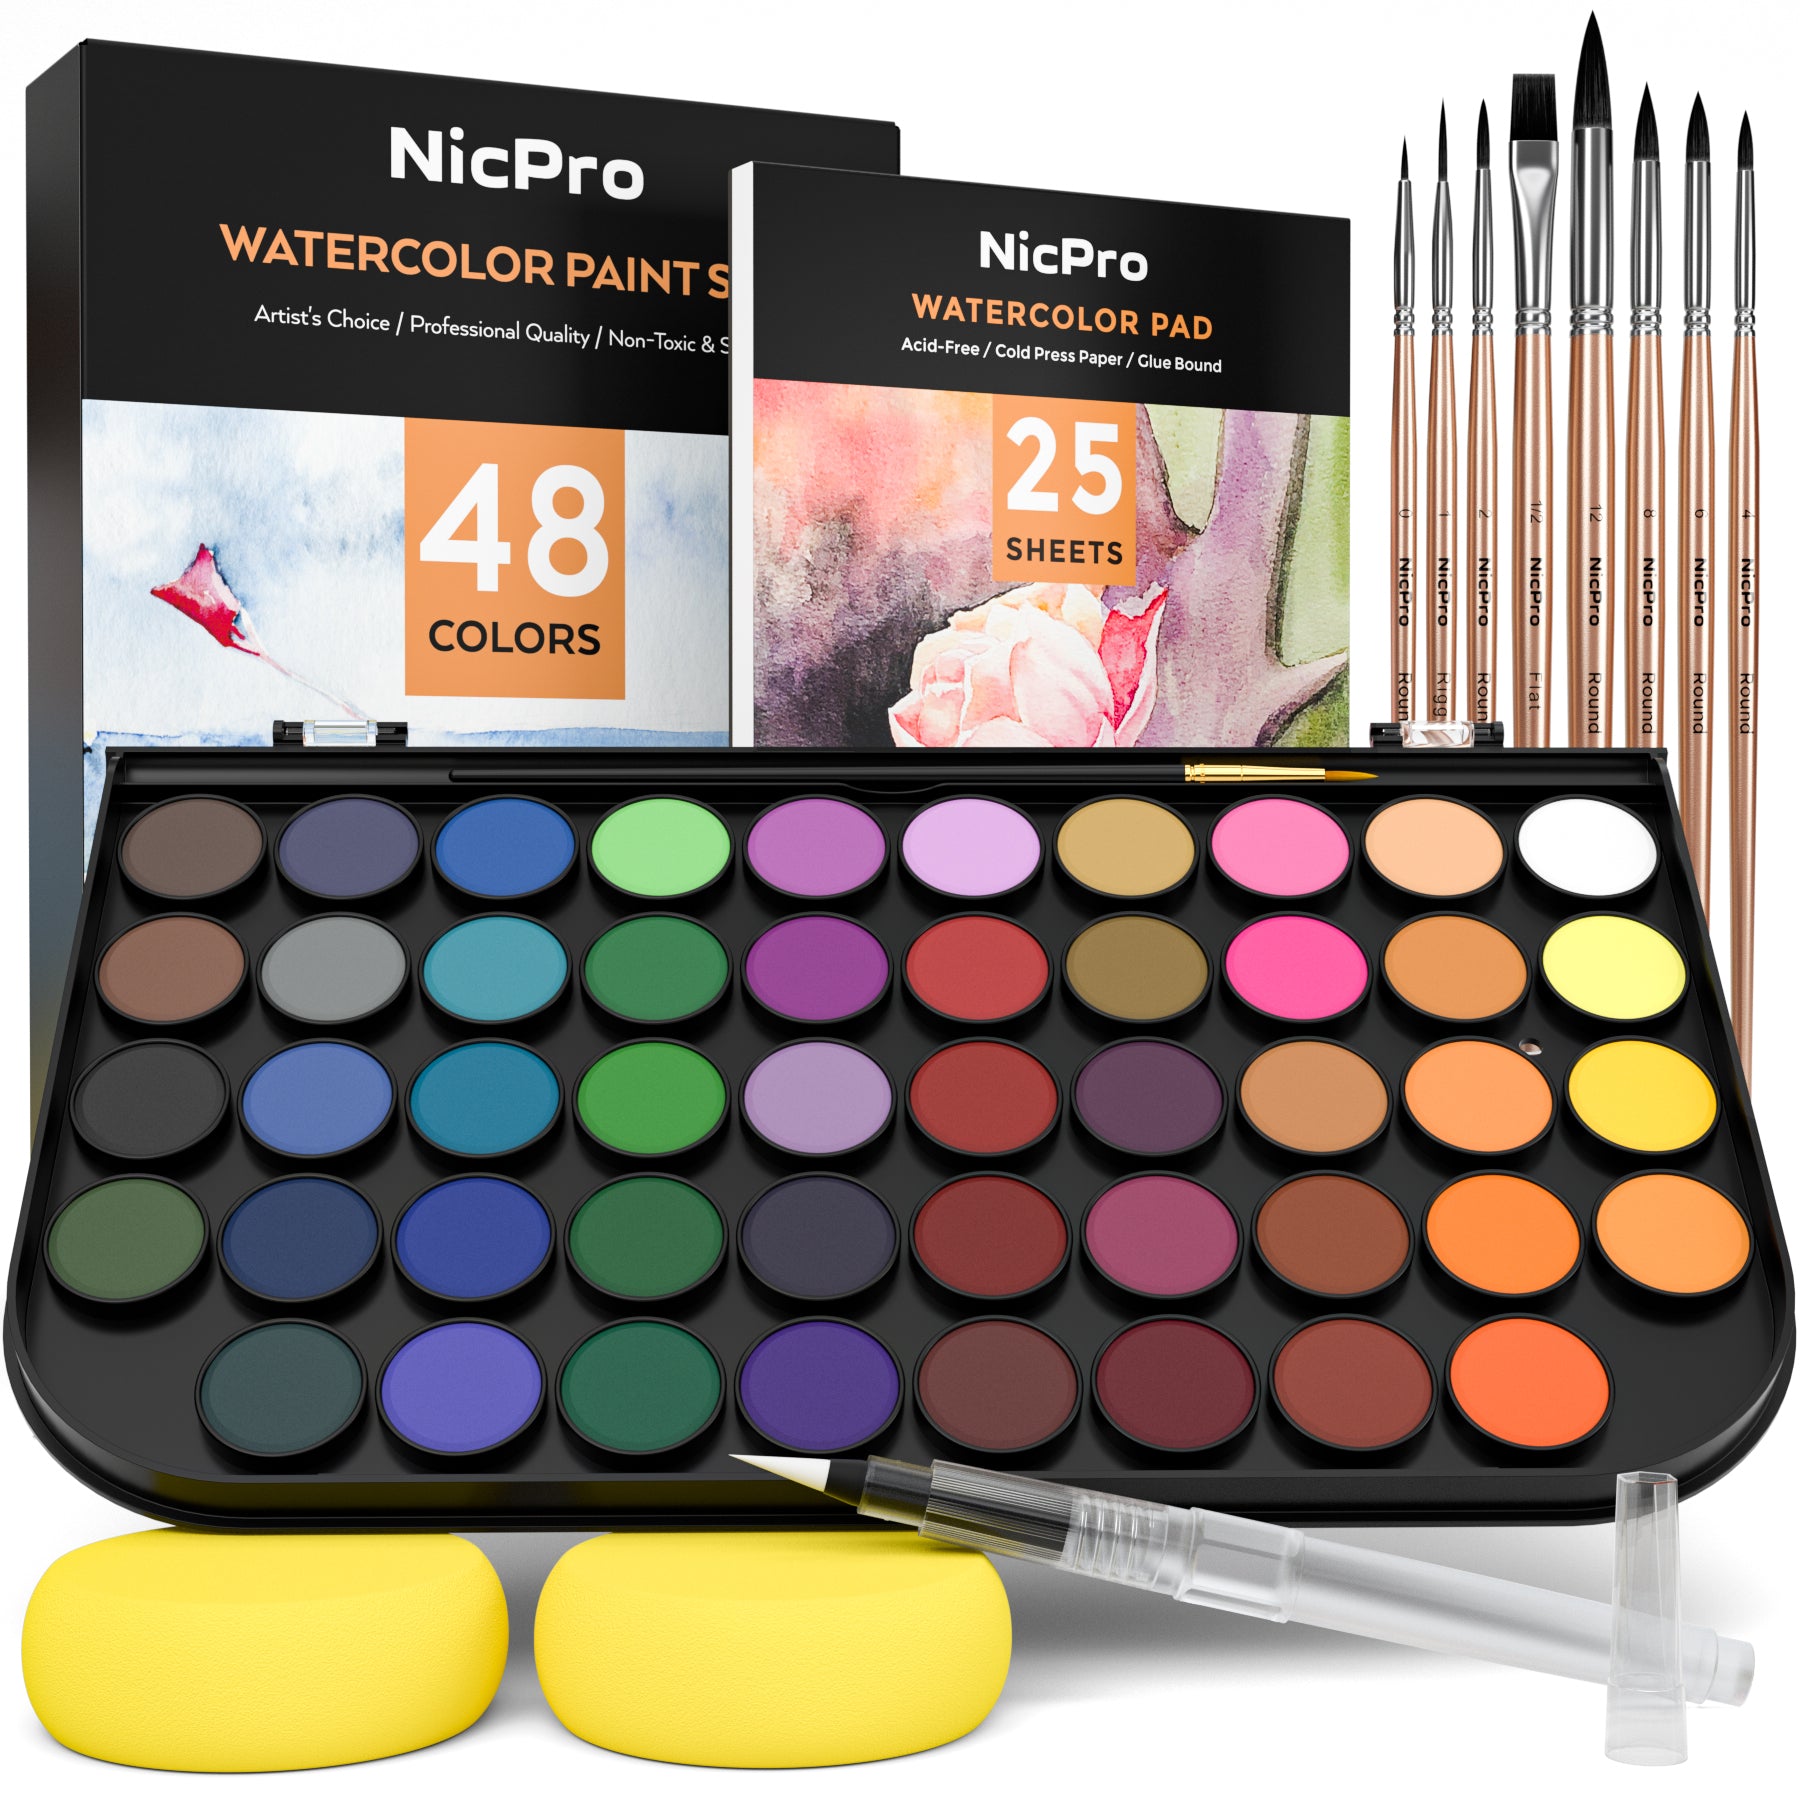 glokers Watercolor Paint Set 24 Colors Arts and Craft Supplies Includes 3  Professional Paint Brushes, 1 Paint Palette - Water Colors Painting Art Kit